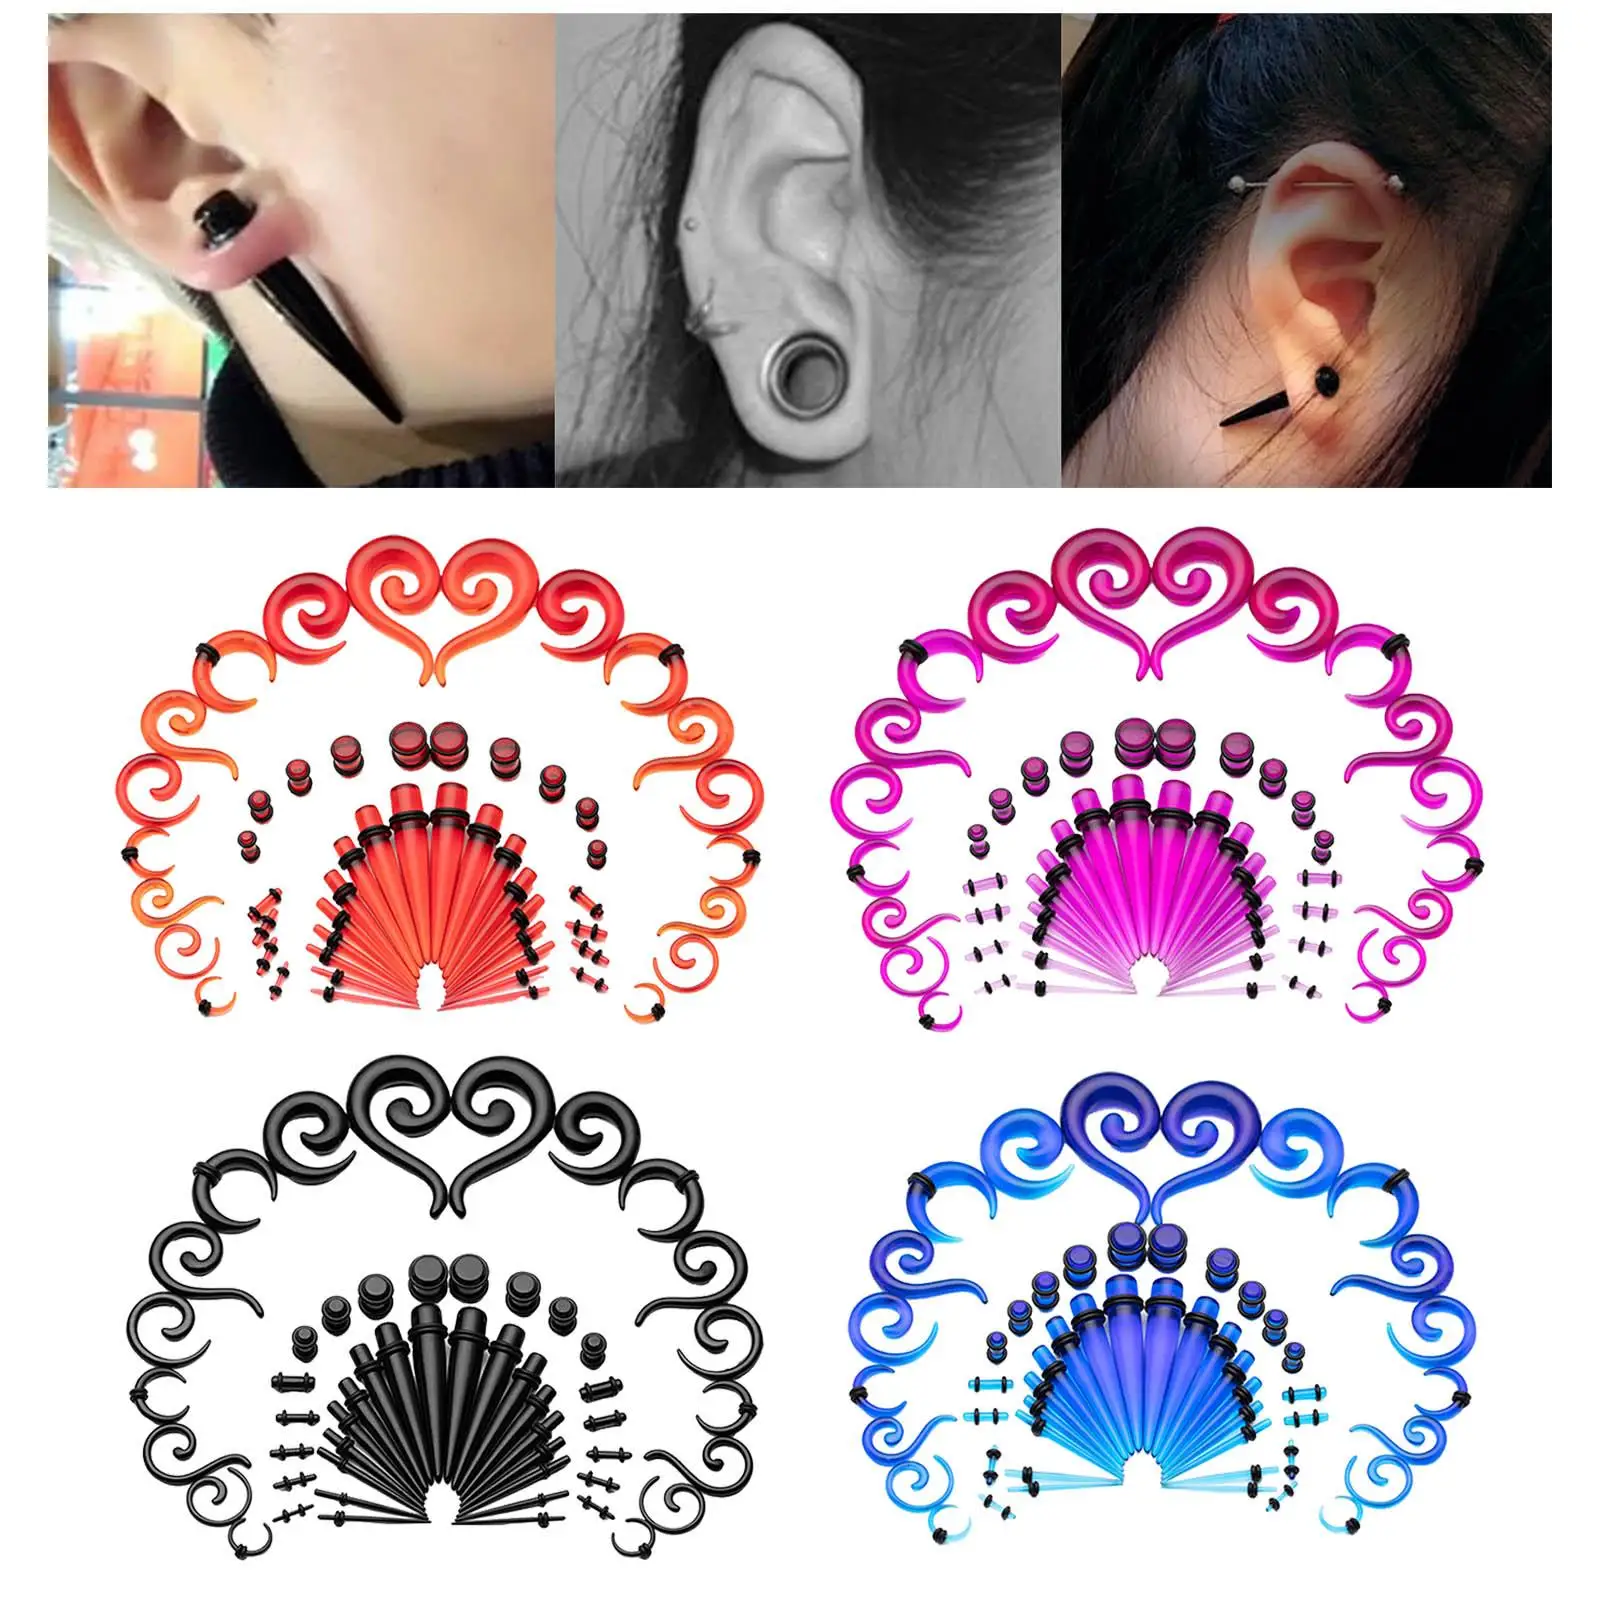 54Pieces Acrylic Ear Stretching Kit 14G-00G Expander Kit Spiral Tunnels